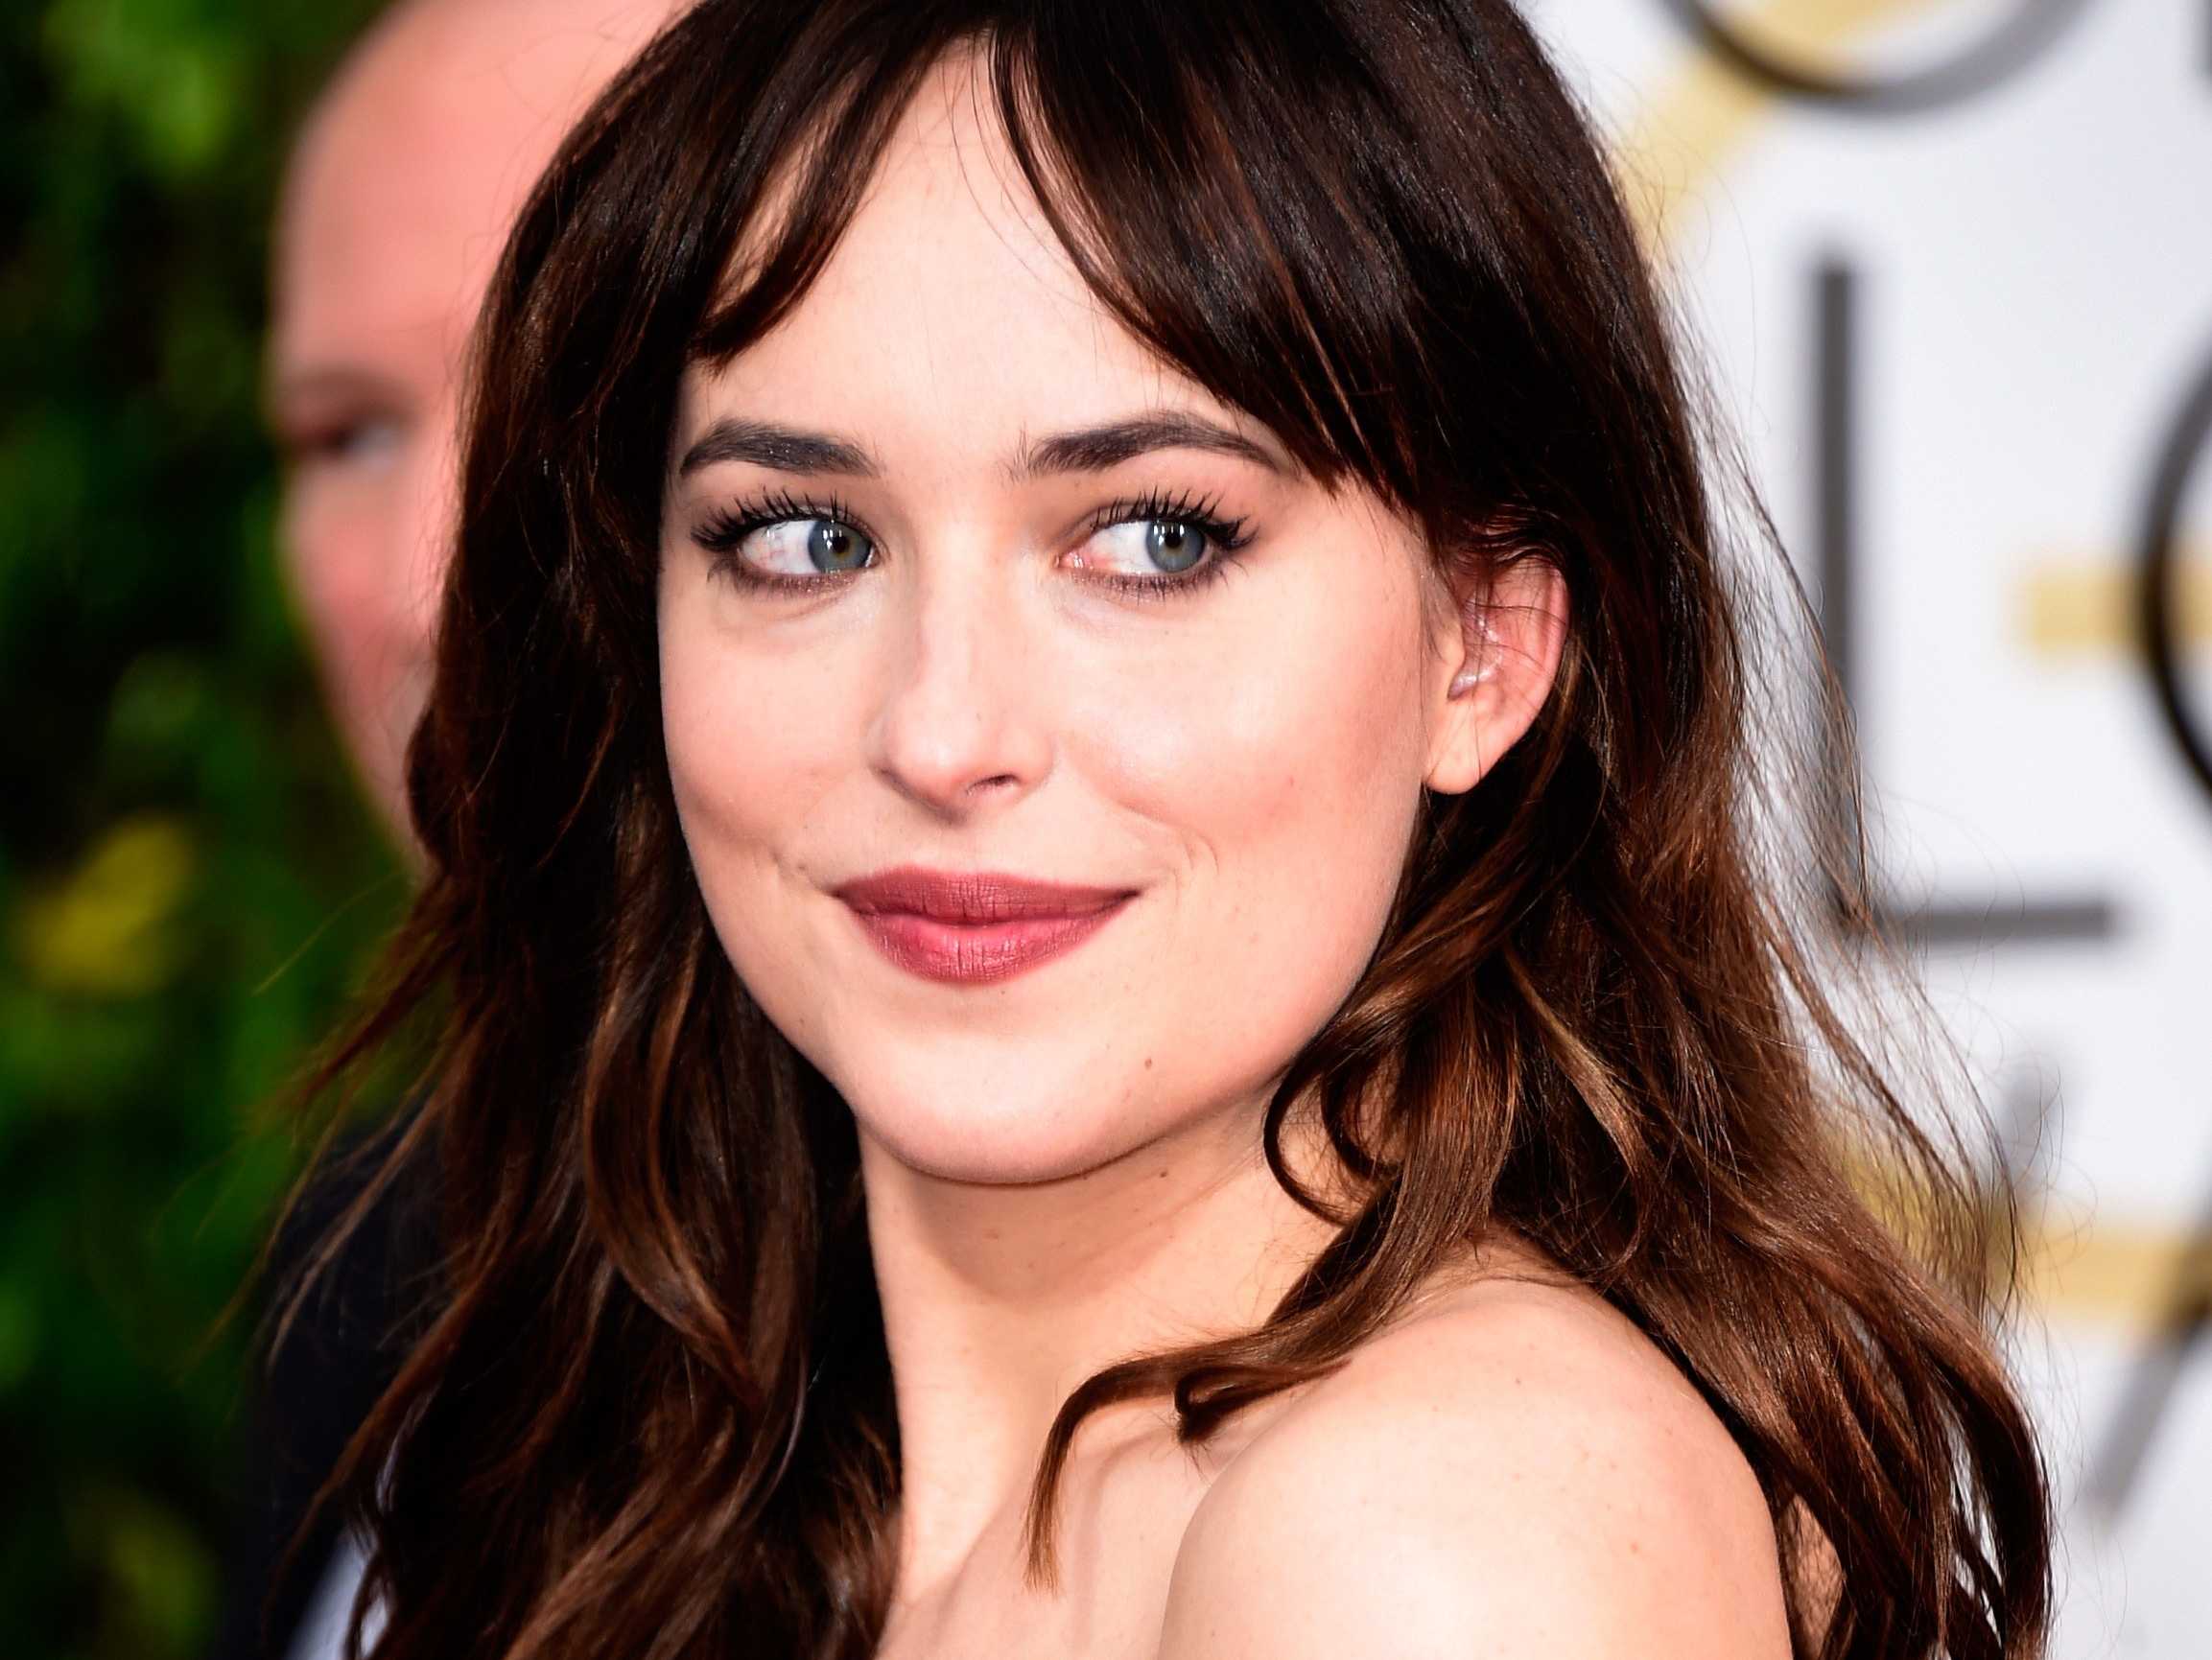 15 Things We Bet You Didn't Know About Fifty Shade's Dakota Johnson